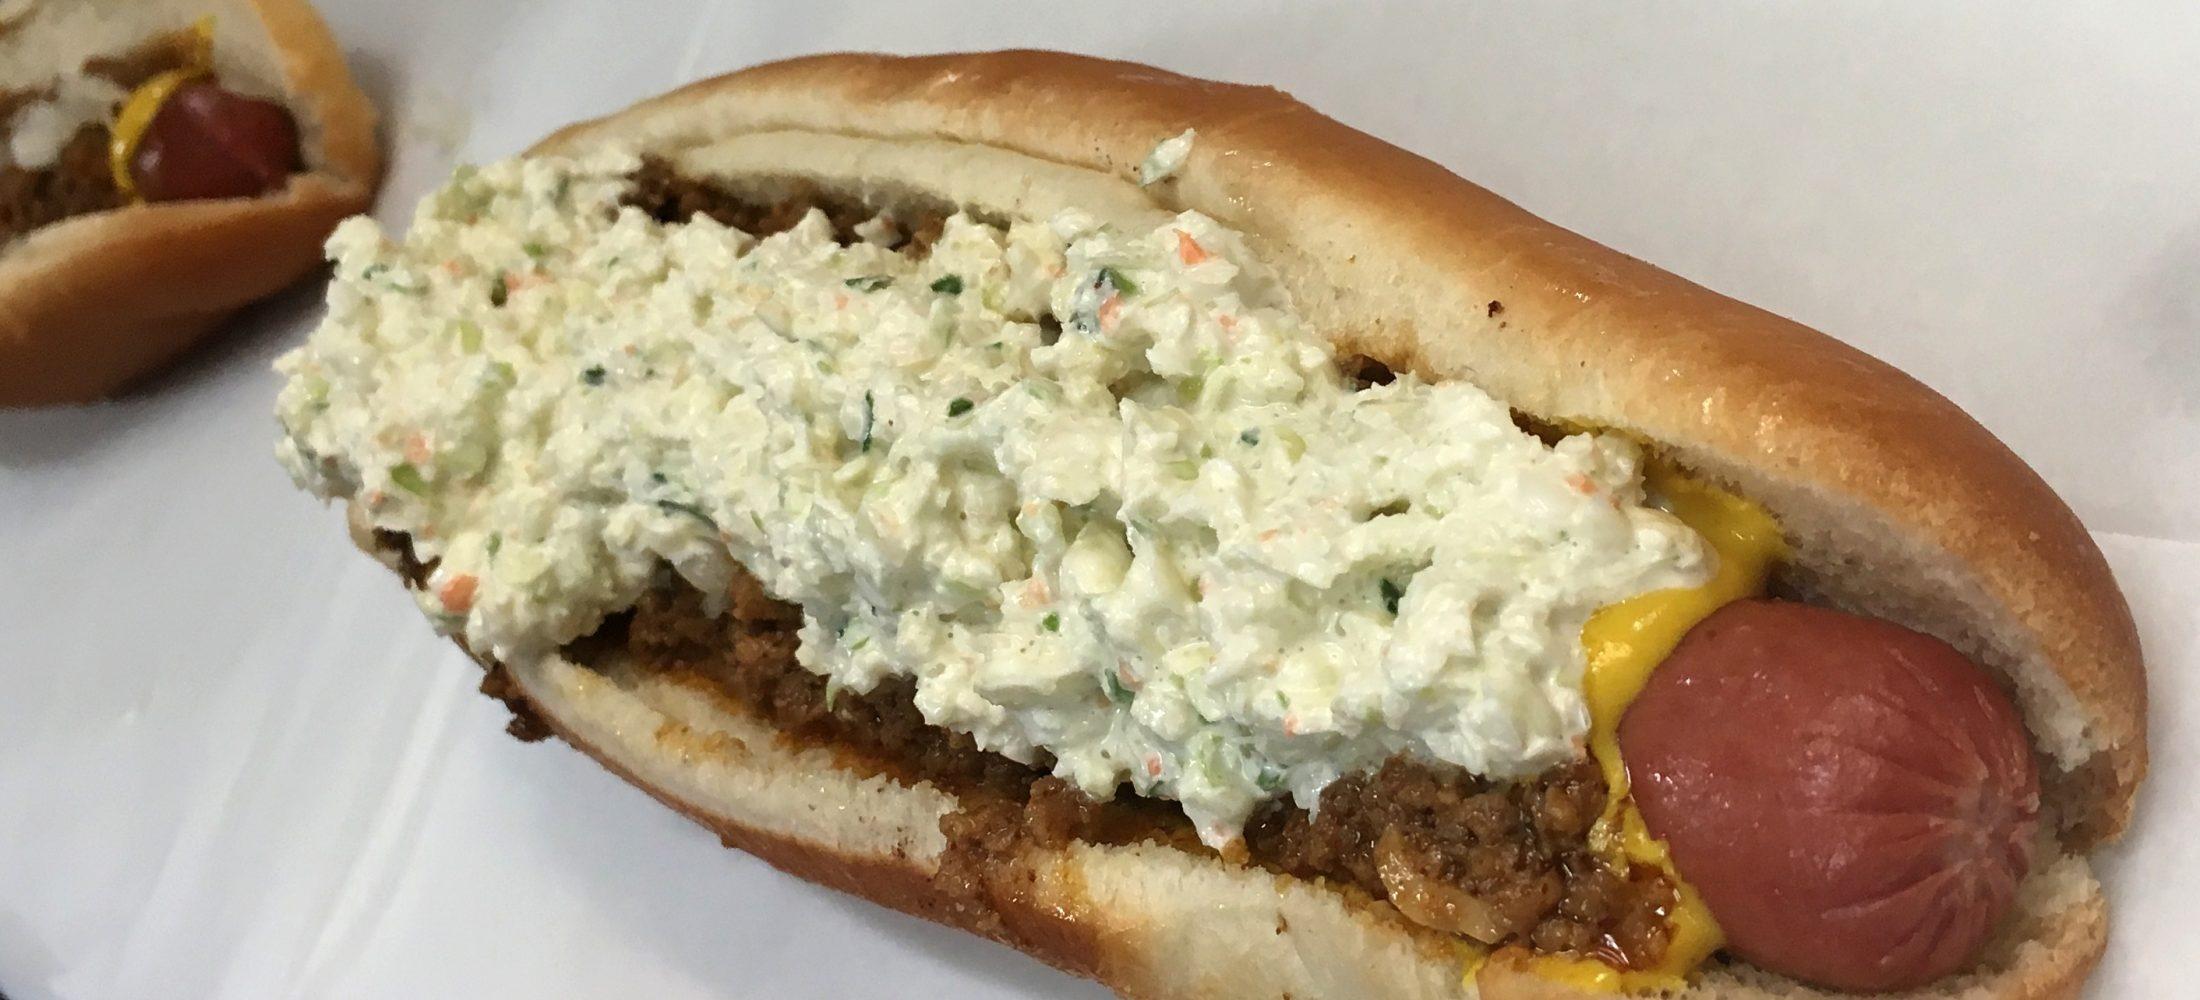 Hot dog in white bun placed on white background. Hot Dog is covered in slaw, and mustard